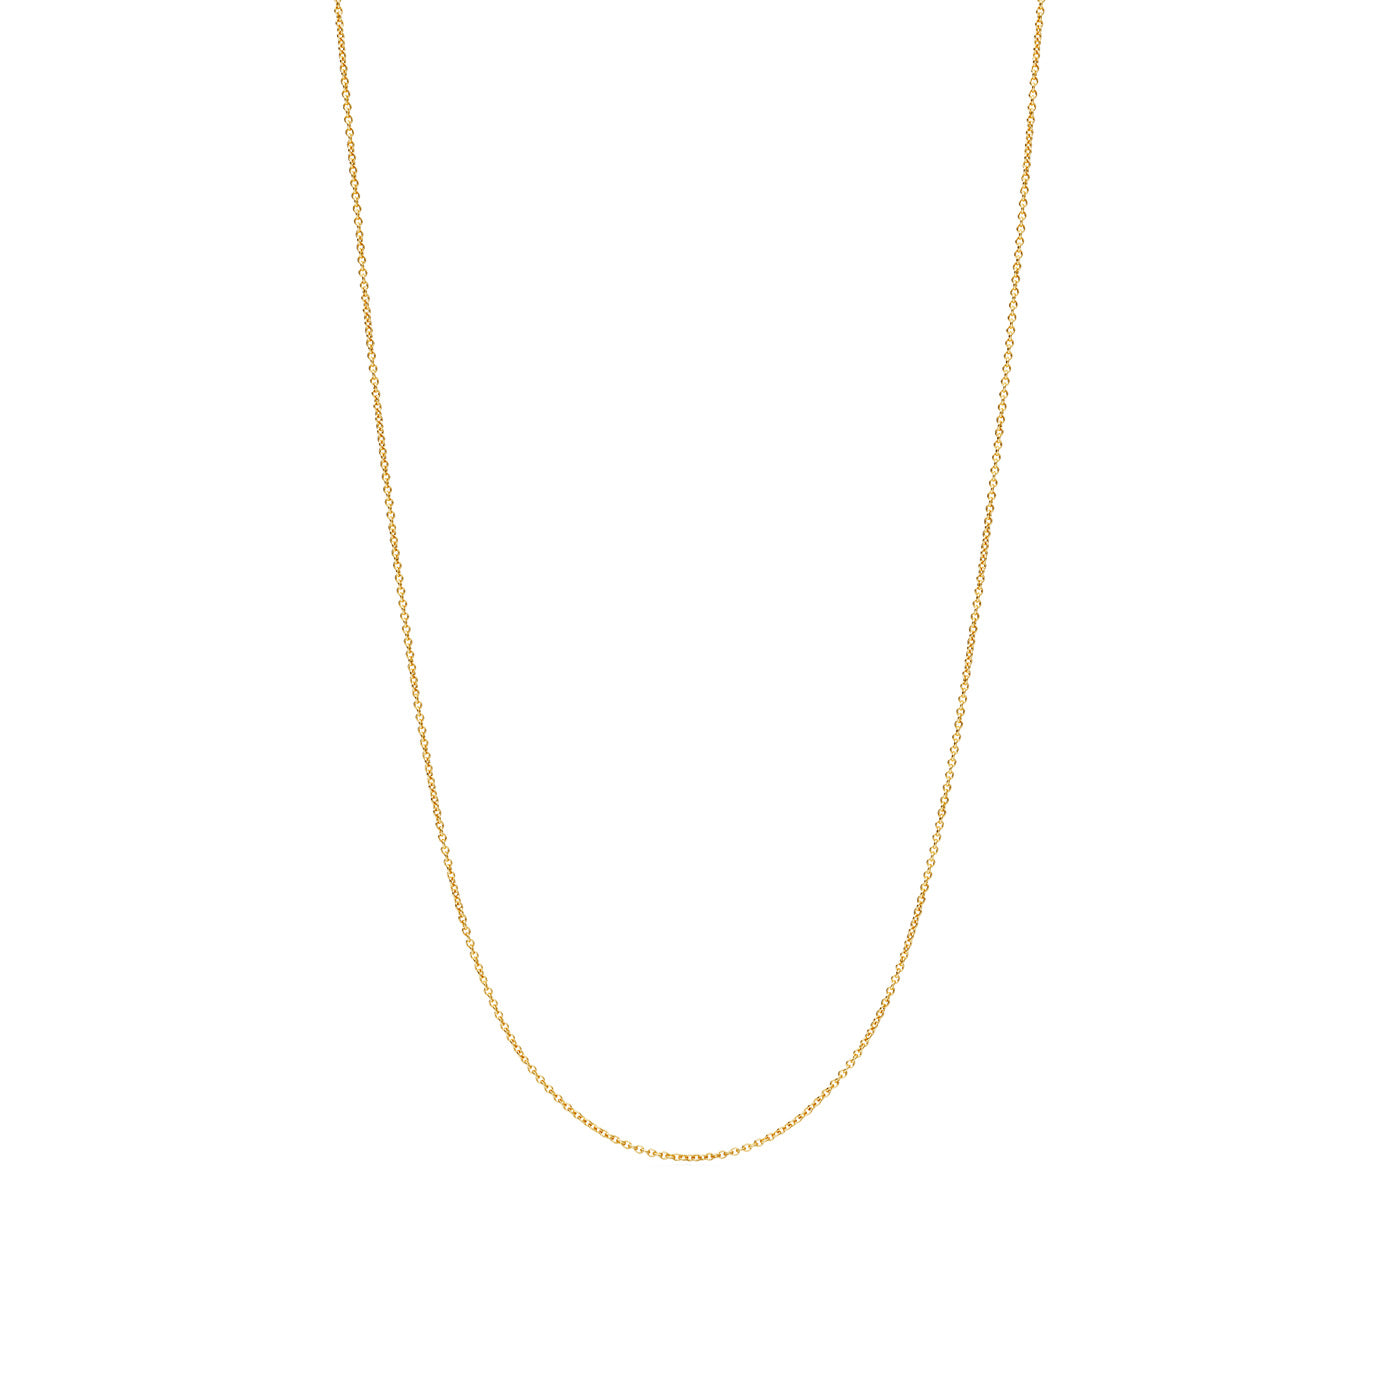 Rolo-1.2mm-Thin-18K-Yellow-Gold-Dainty-Chain-18-Inch-with-Lobster-Clasp